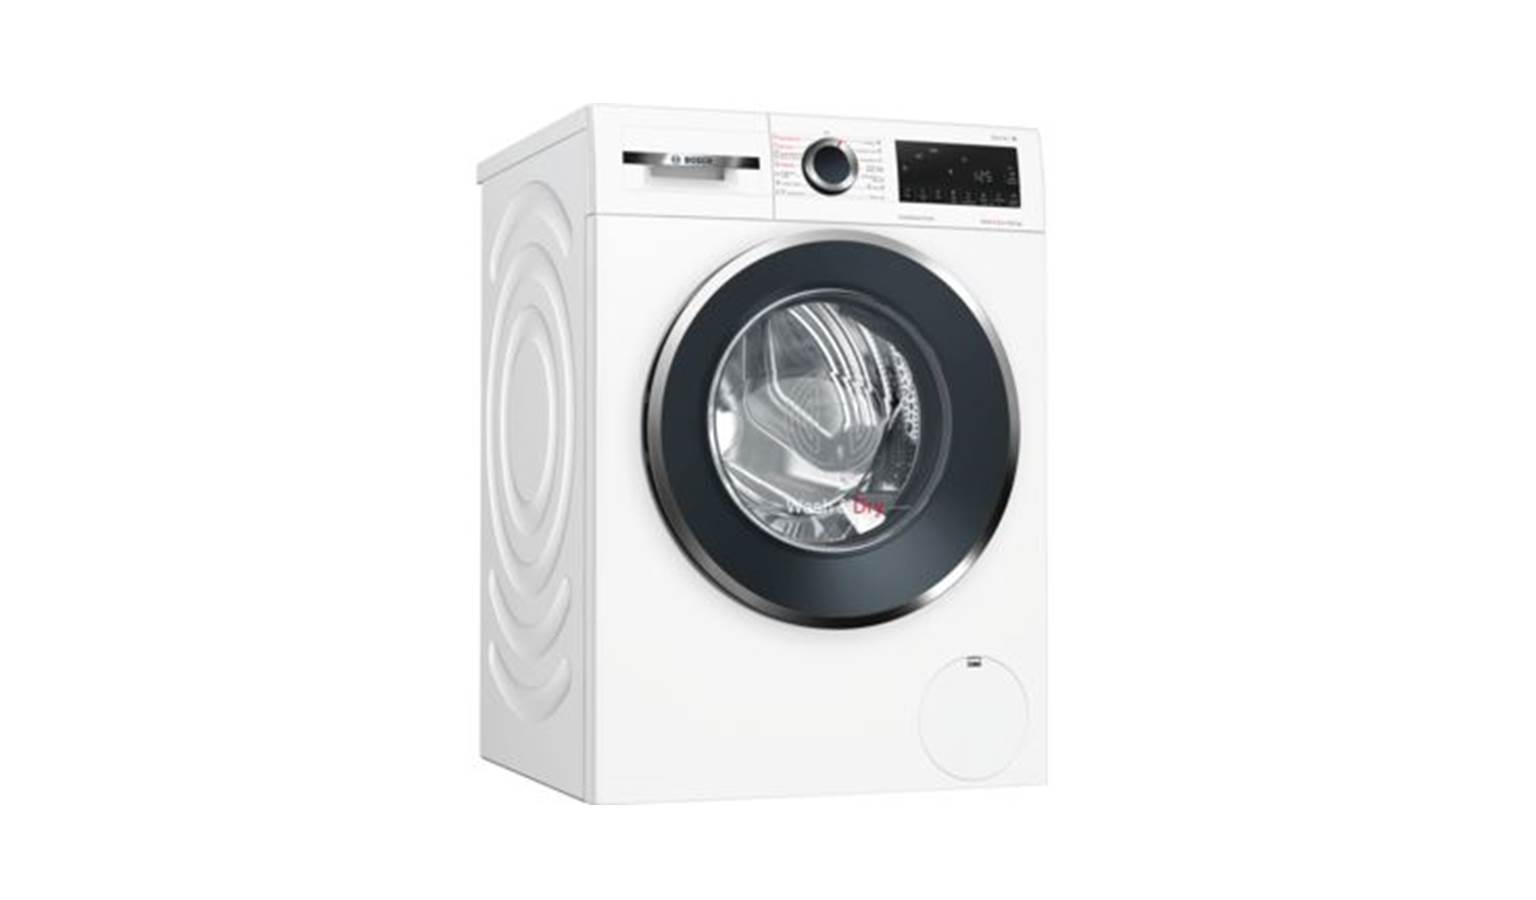 double decker washer and dryer